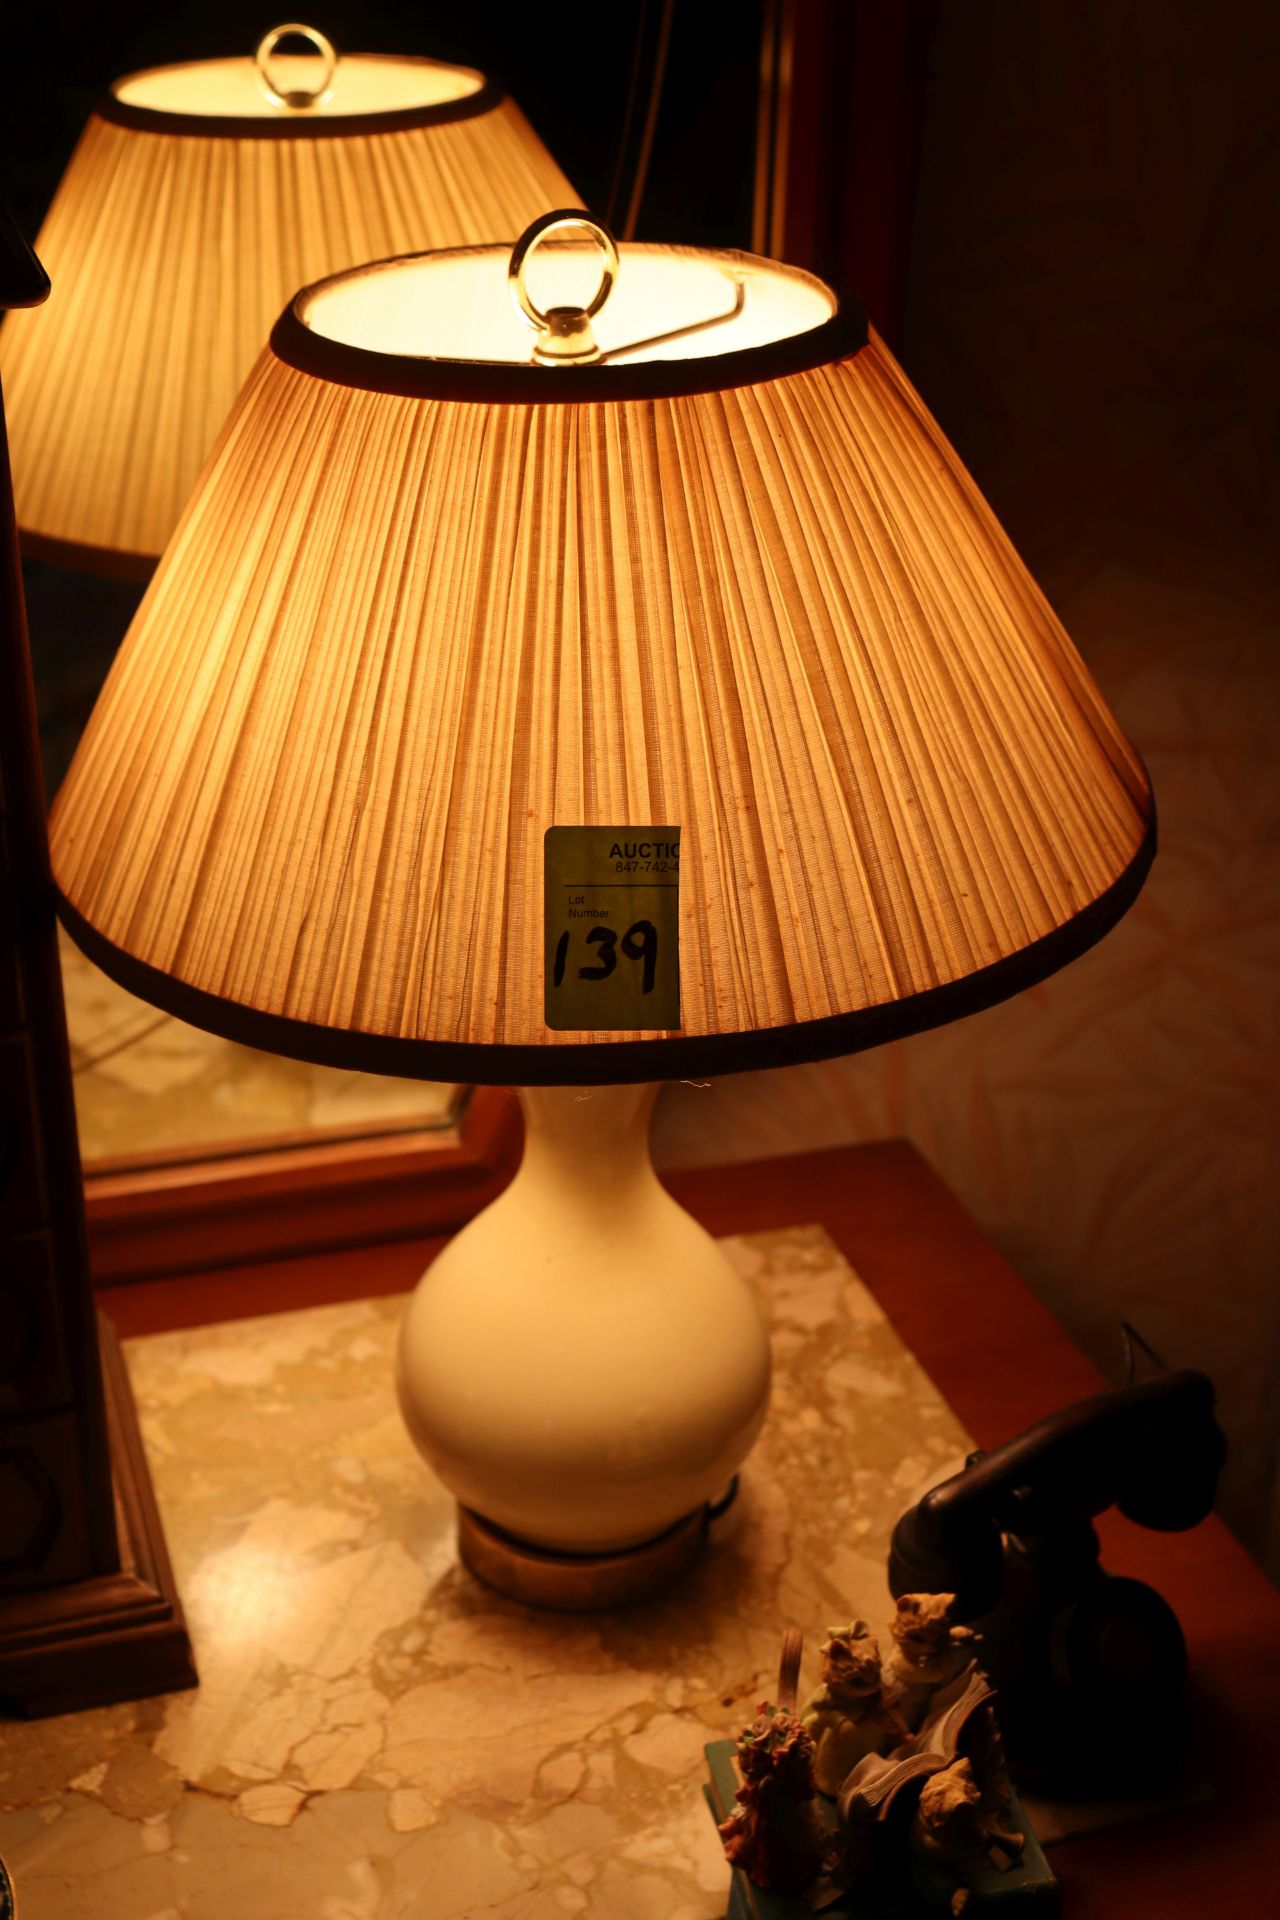 Pair of table lamps, height 18"